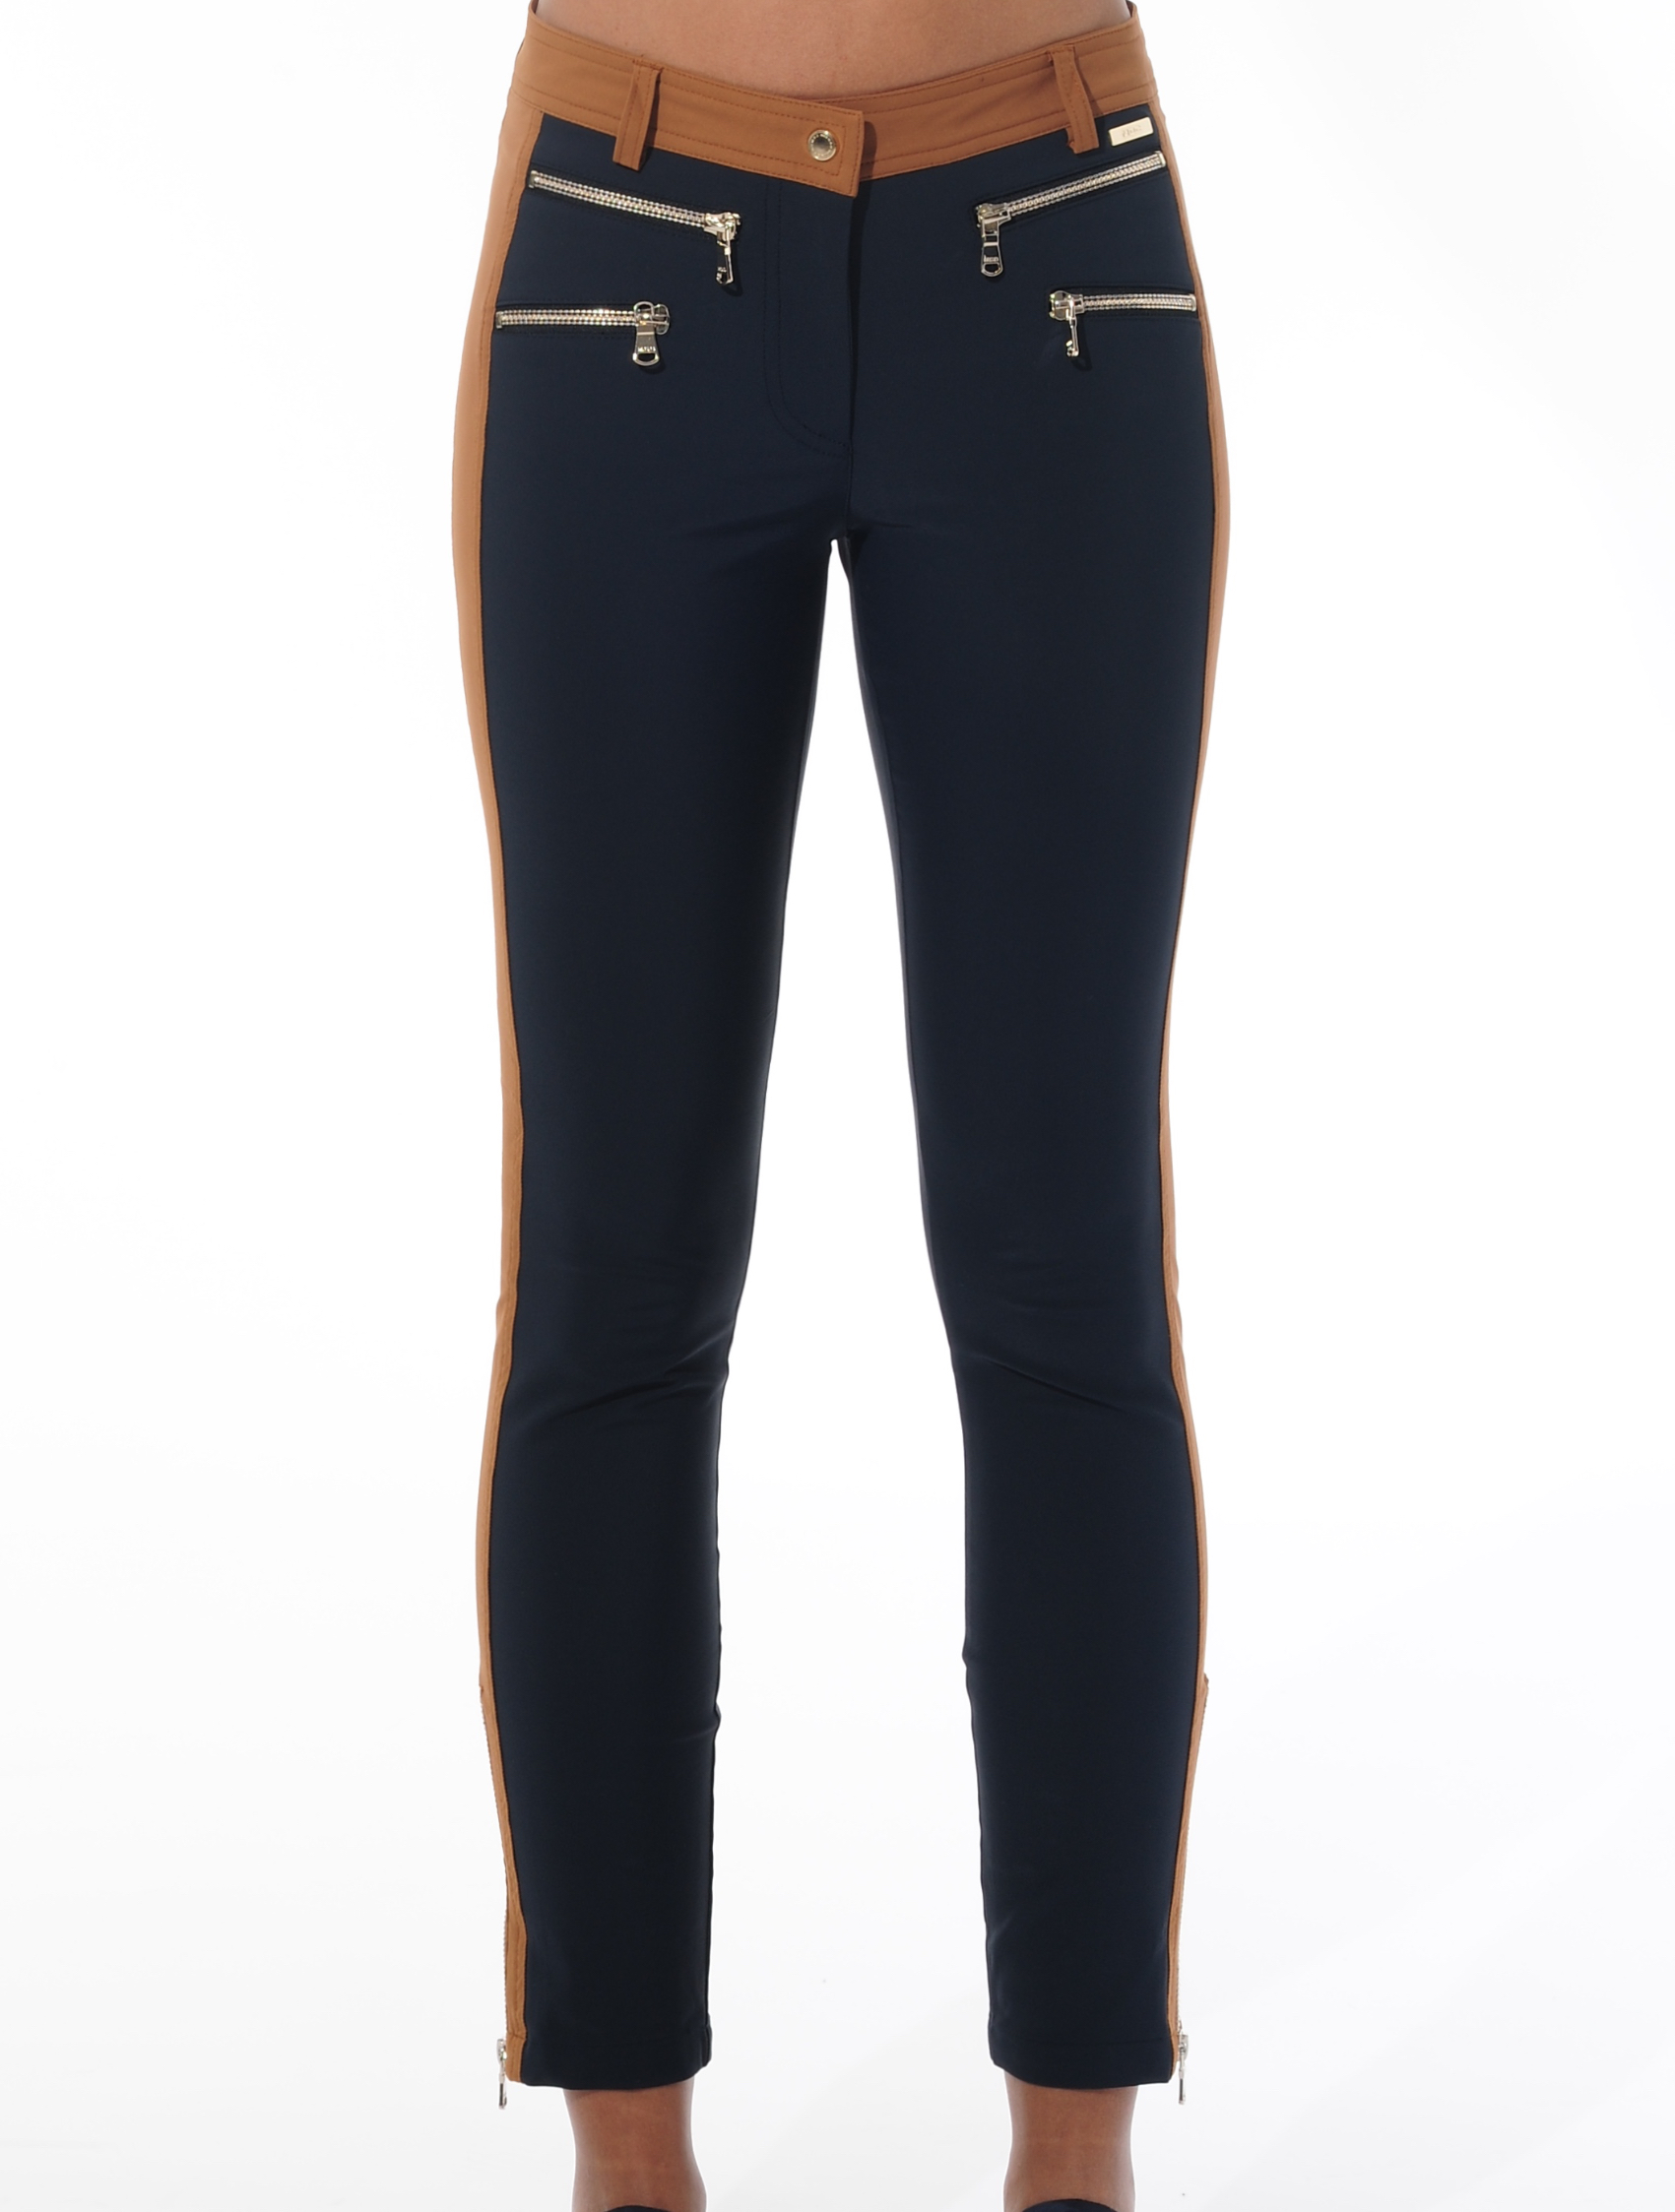 4way stretch double zip ankle pants night blue/ocre 